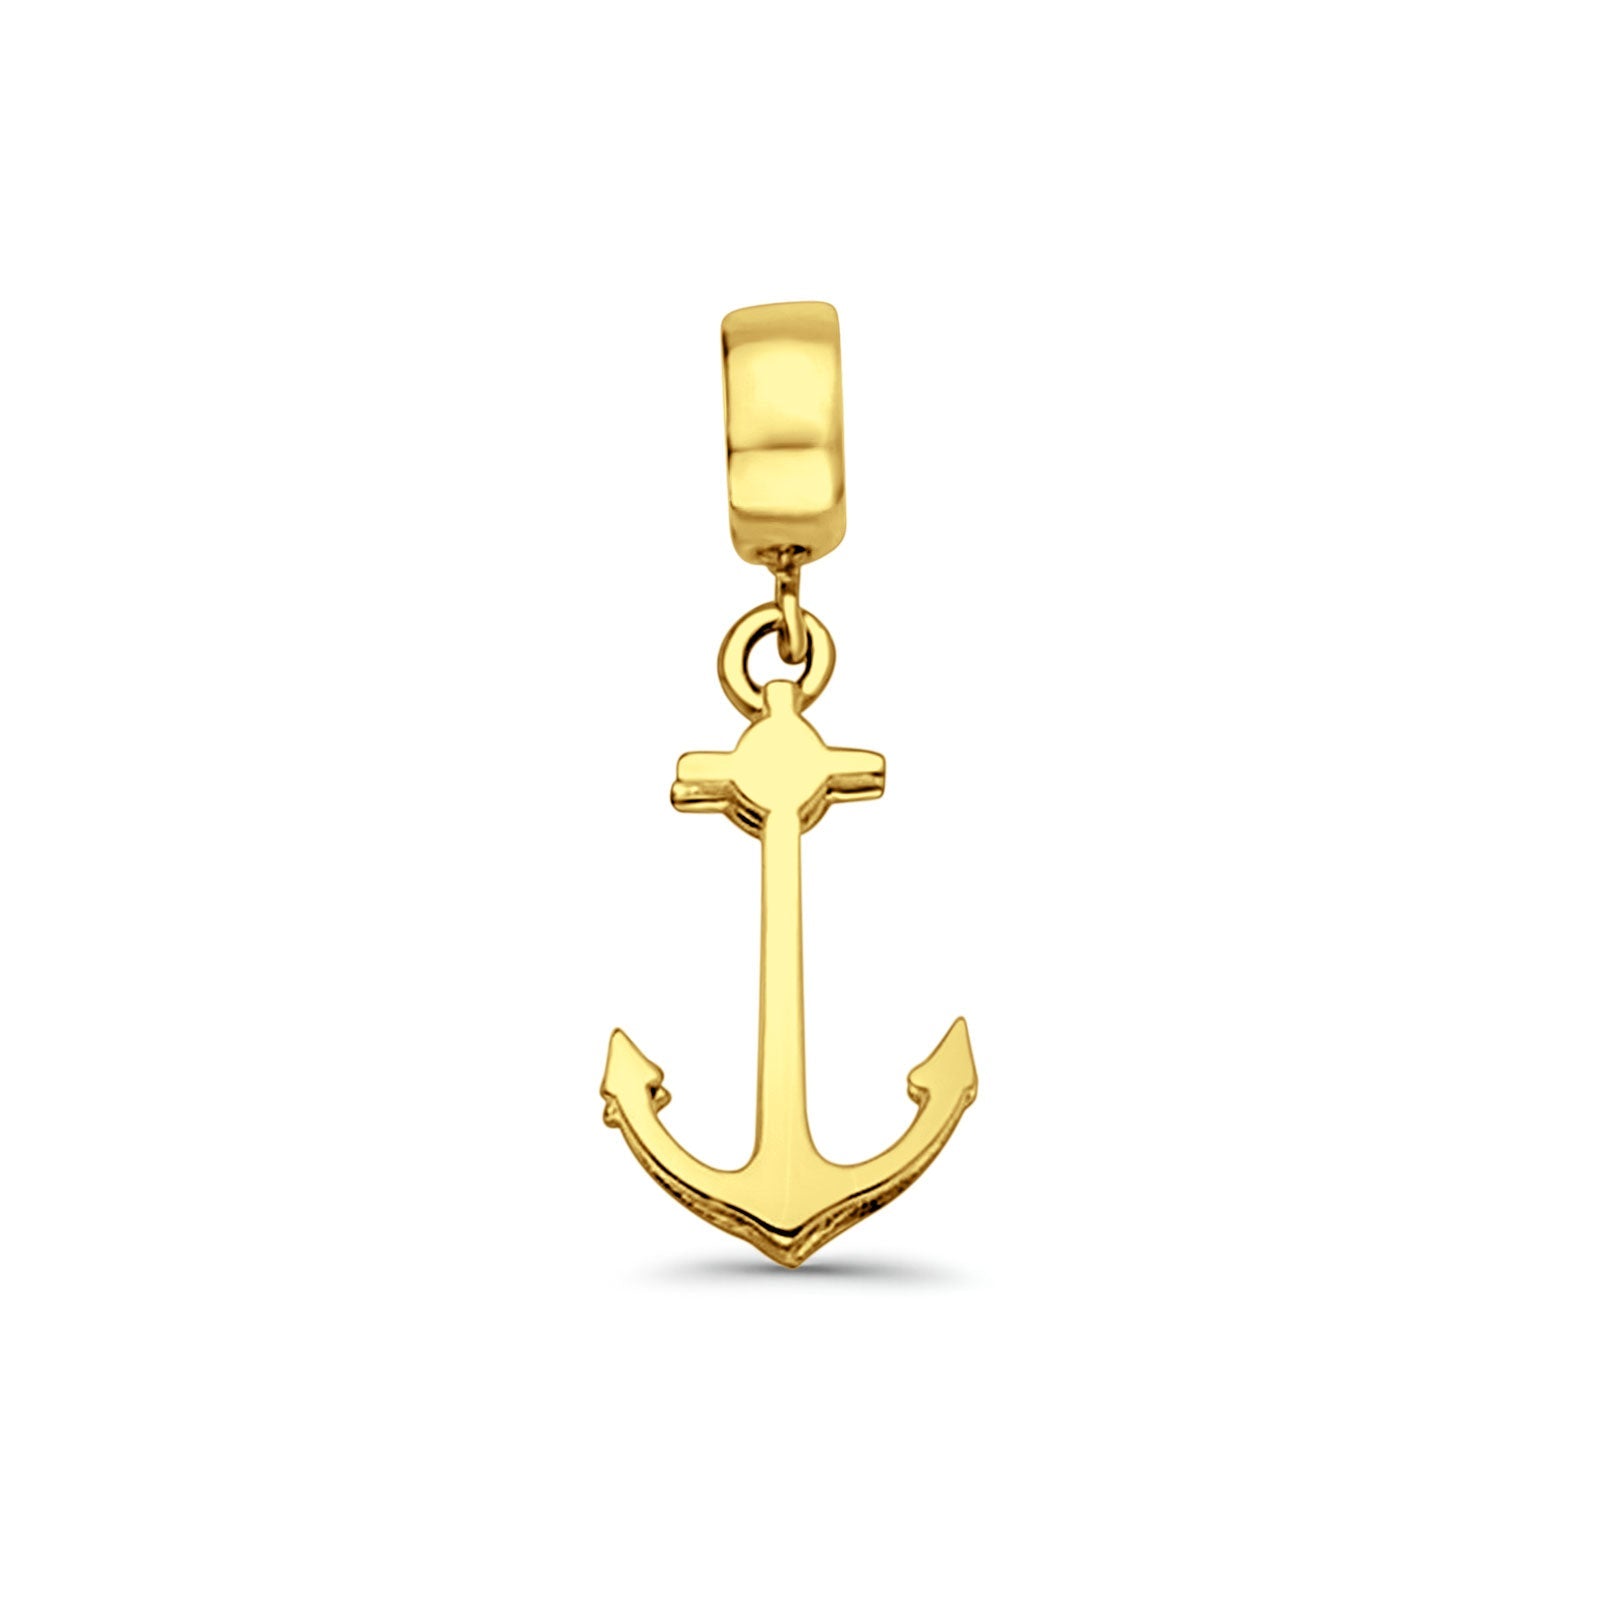 14K Yellow Gold Anchor Charm for Mix&Match Pendant 24mmX9mm 1.1 grams